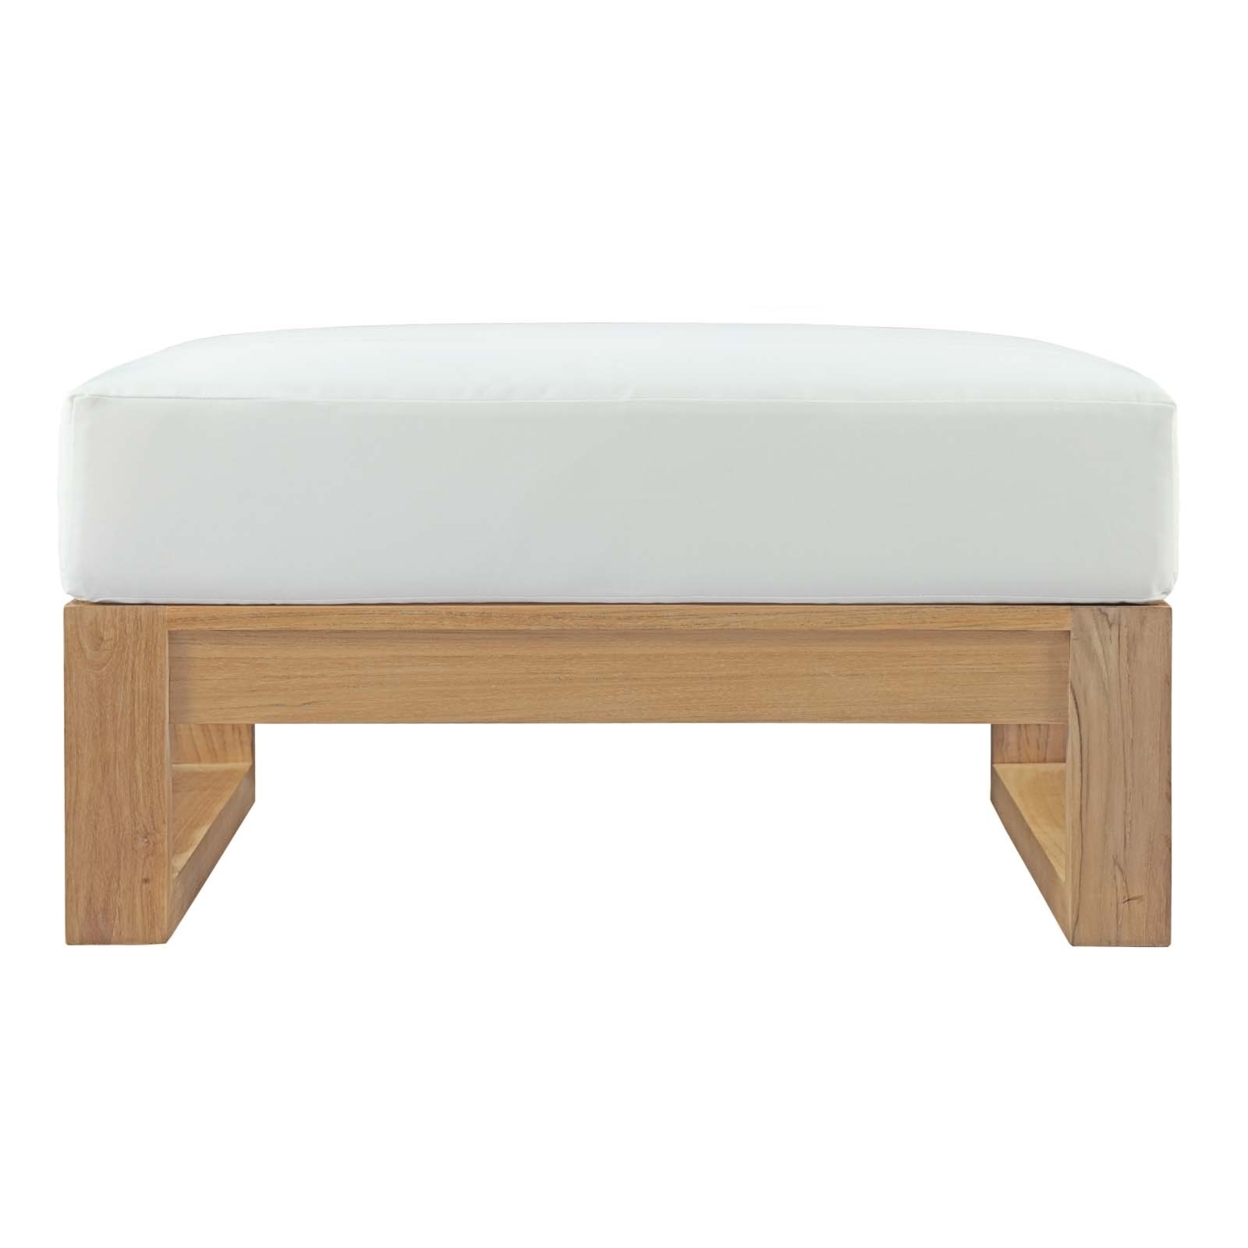 Modway Upland Outdoor Patio Teak Ottoman in Natural White - image 2 of 4